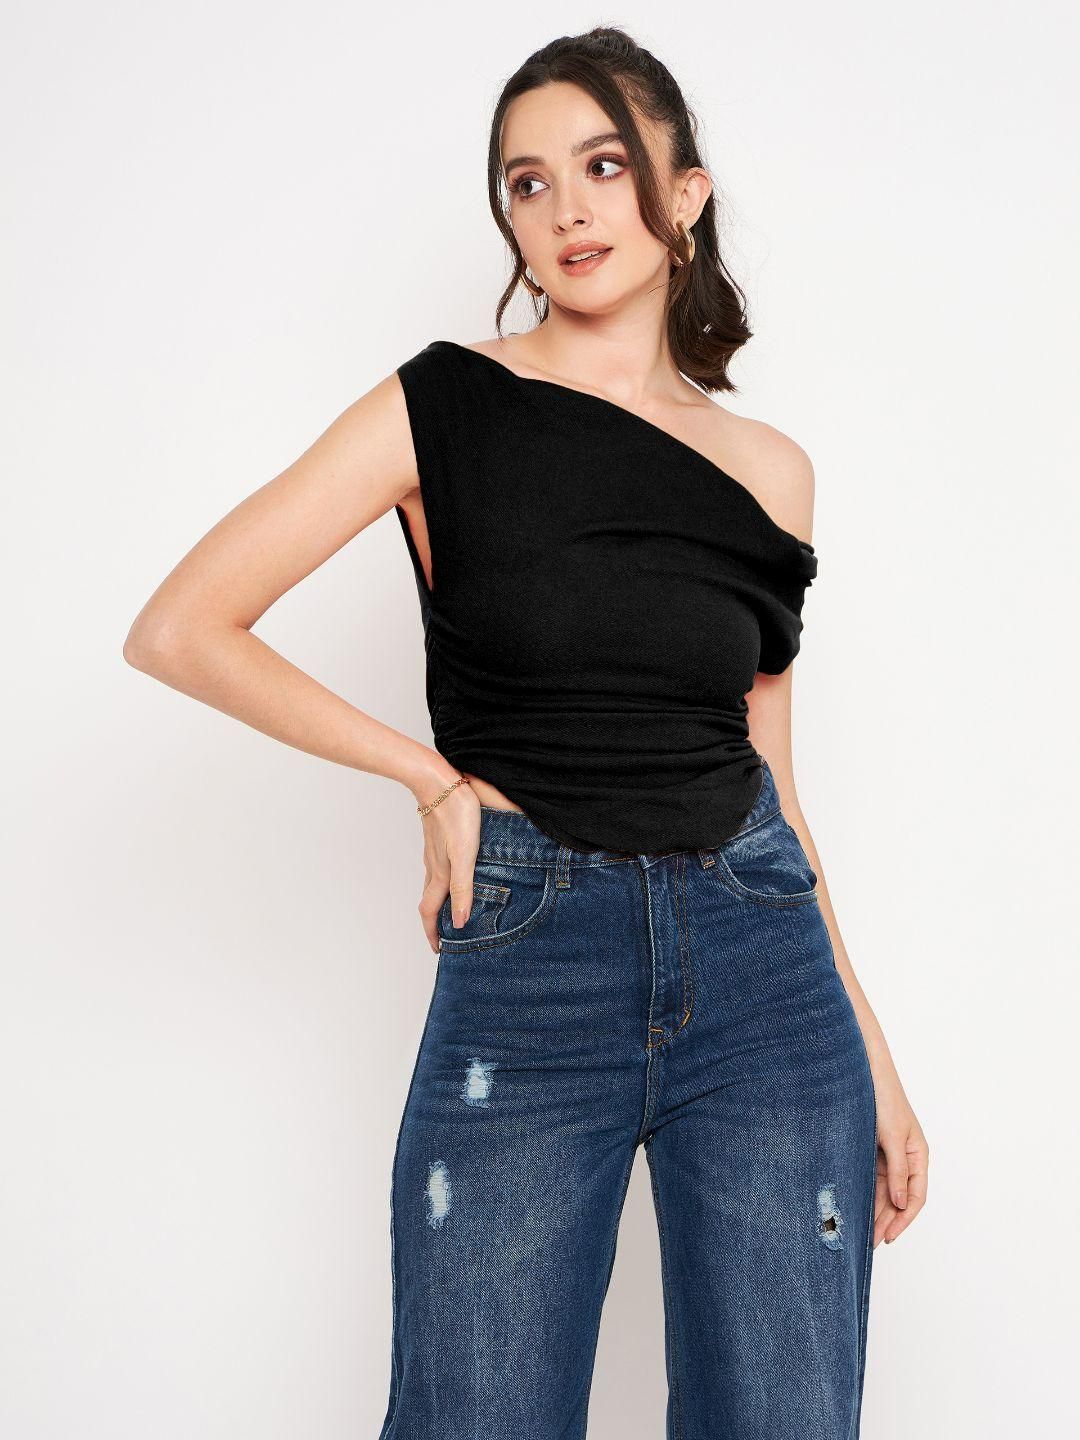 Stretchable Polyester Round Neck Sleeveless Crop Top